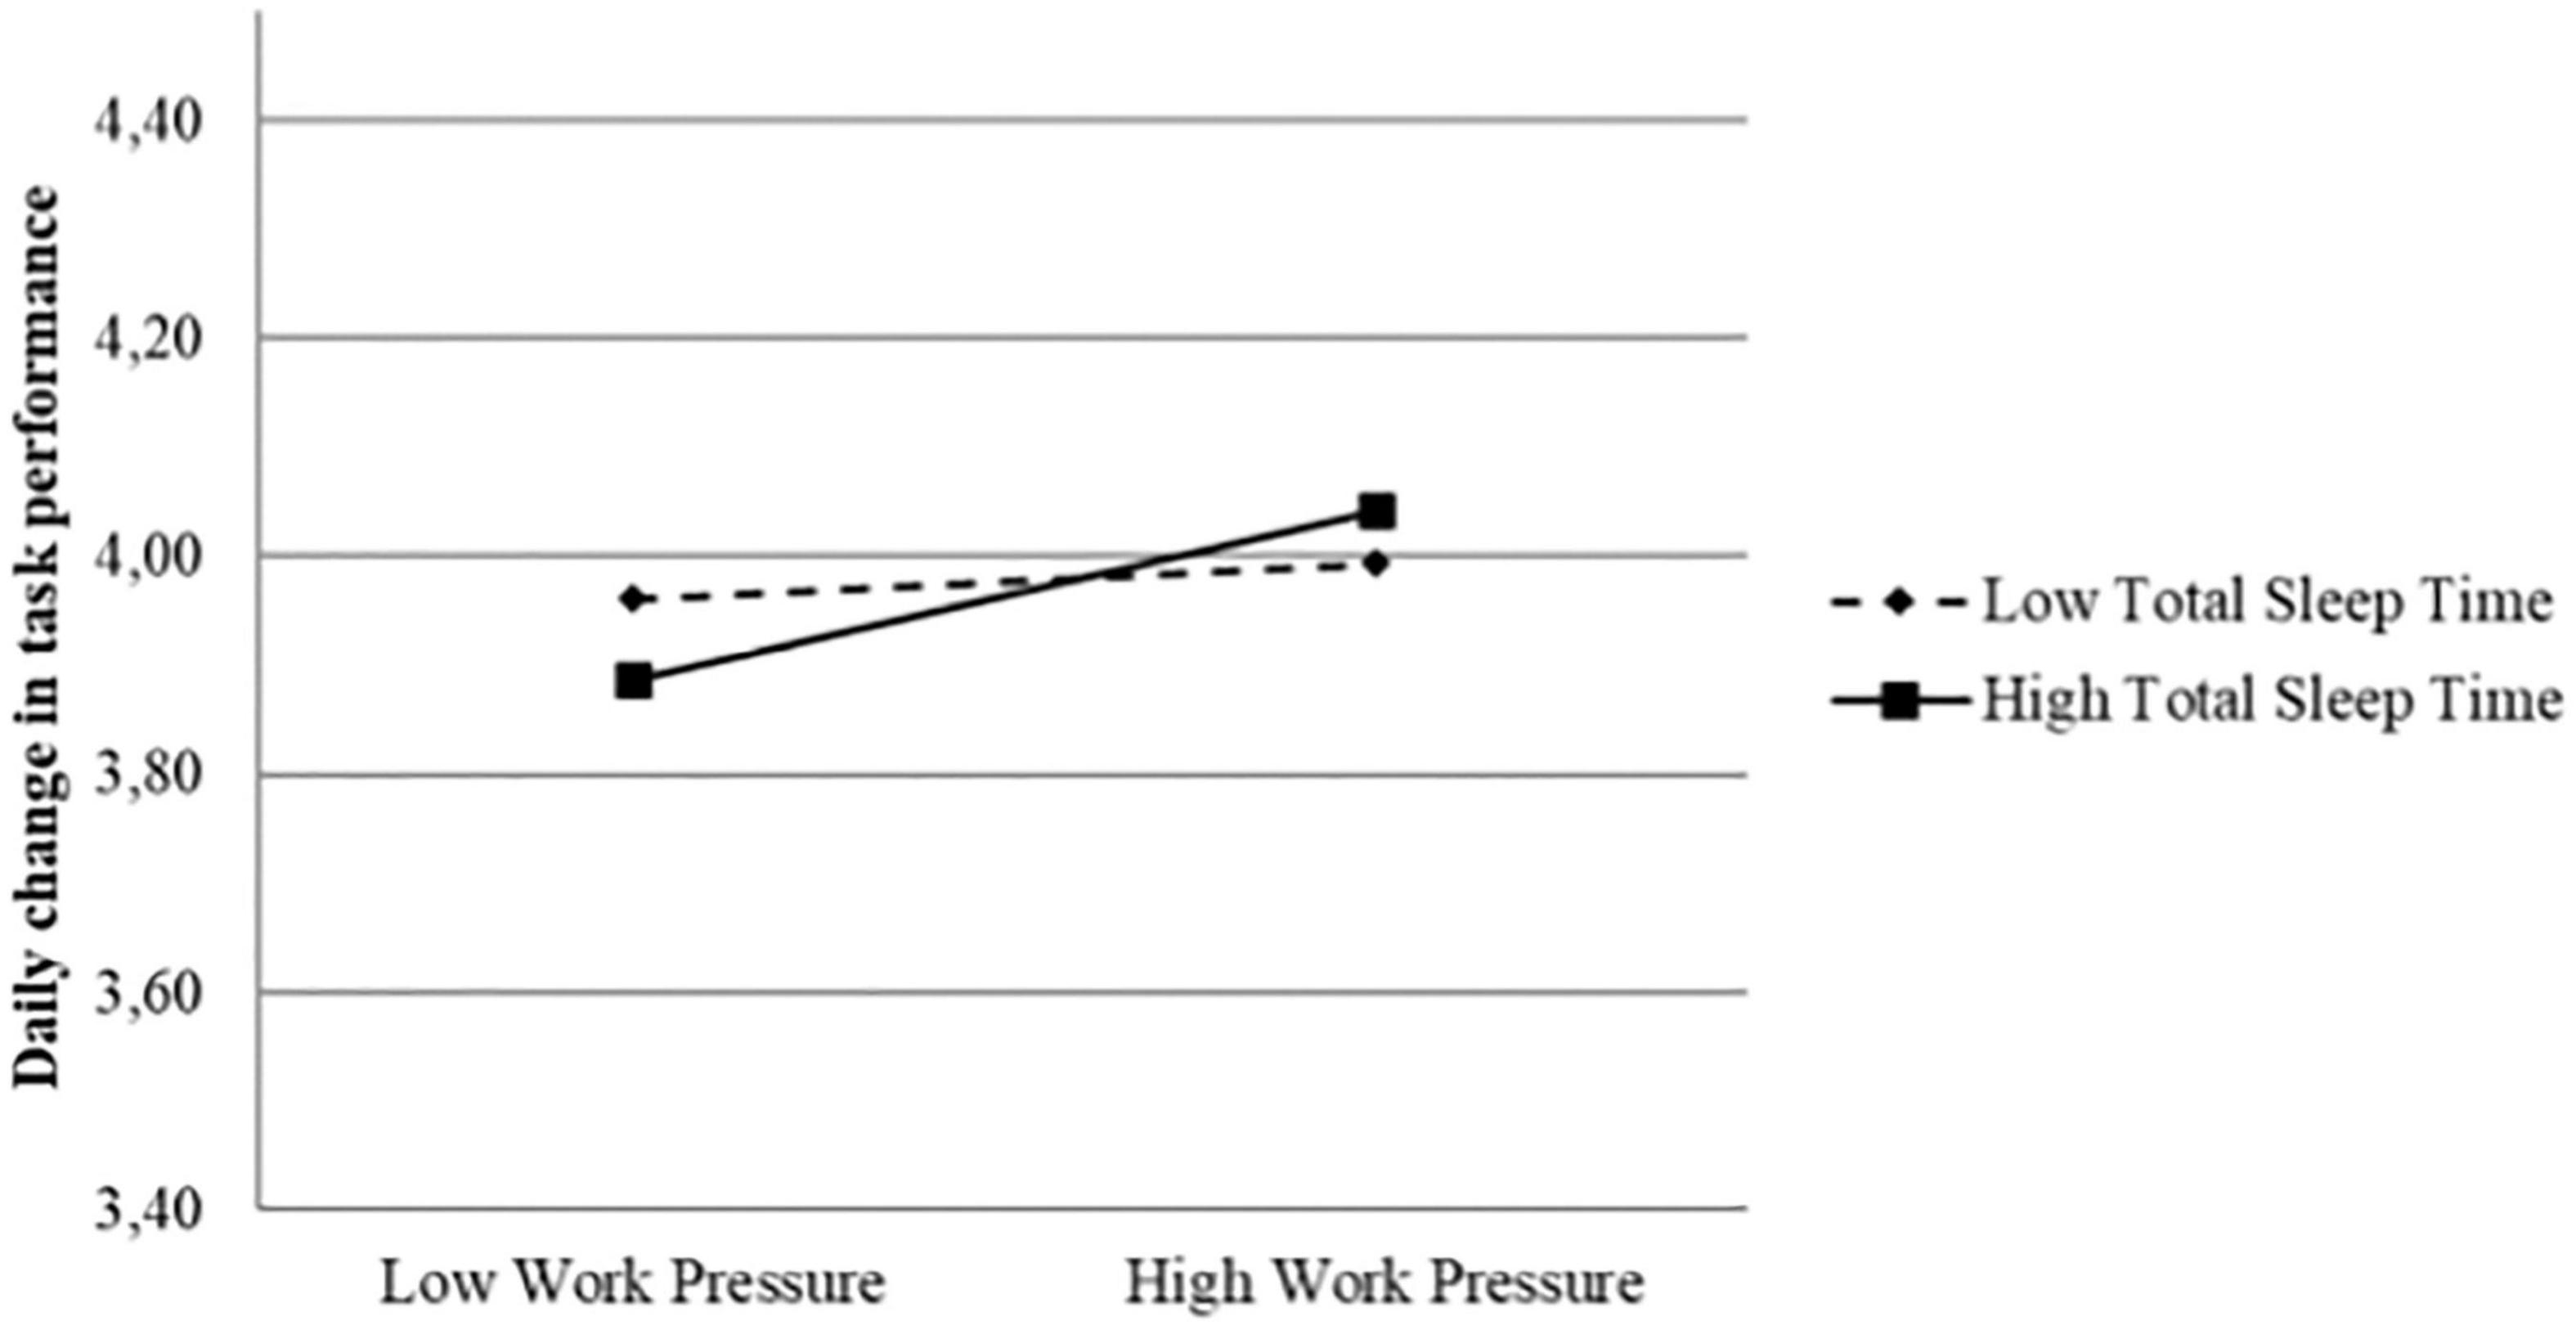 The age-performance relationship for a cognitive-intensive task